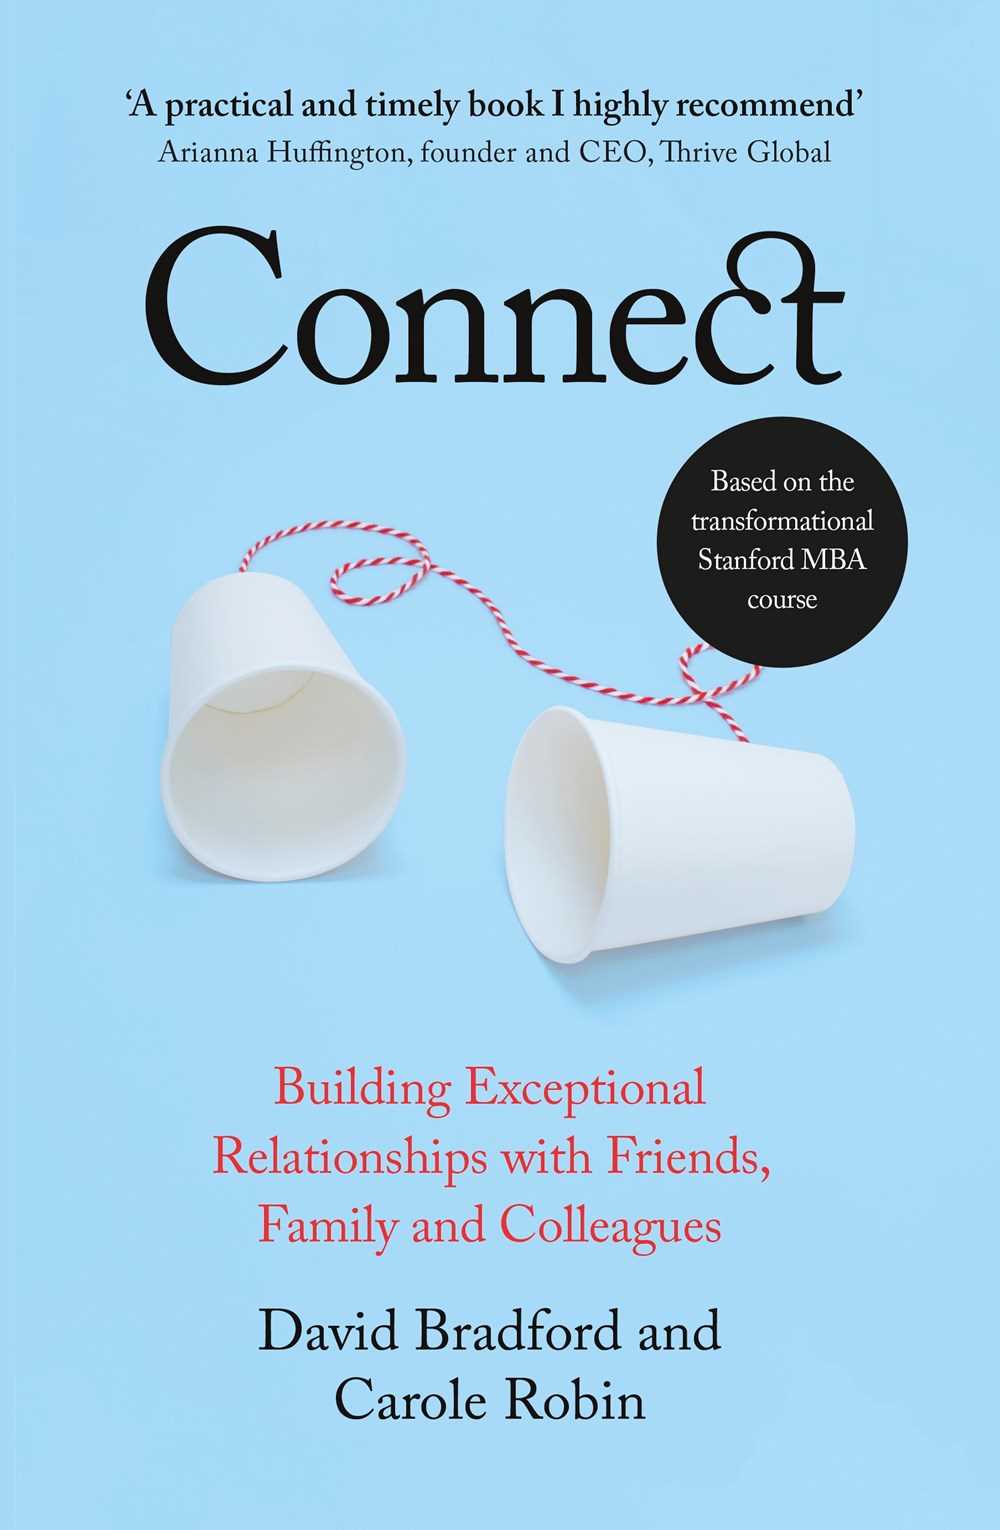 Connect: Building Exceptional Relationships with Family, Friends, and Colleagues by David Bradford,  Carole Robin